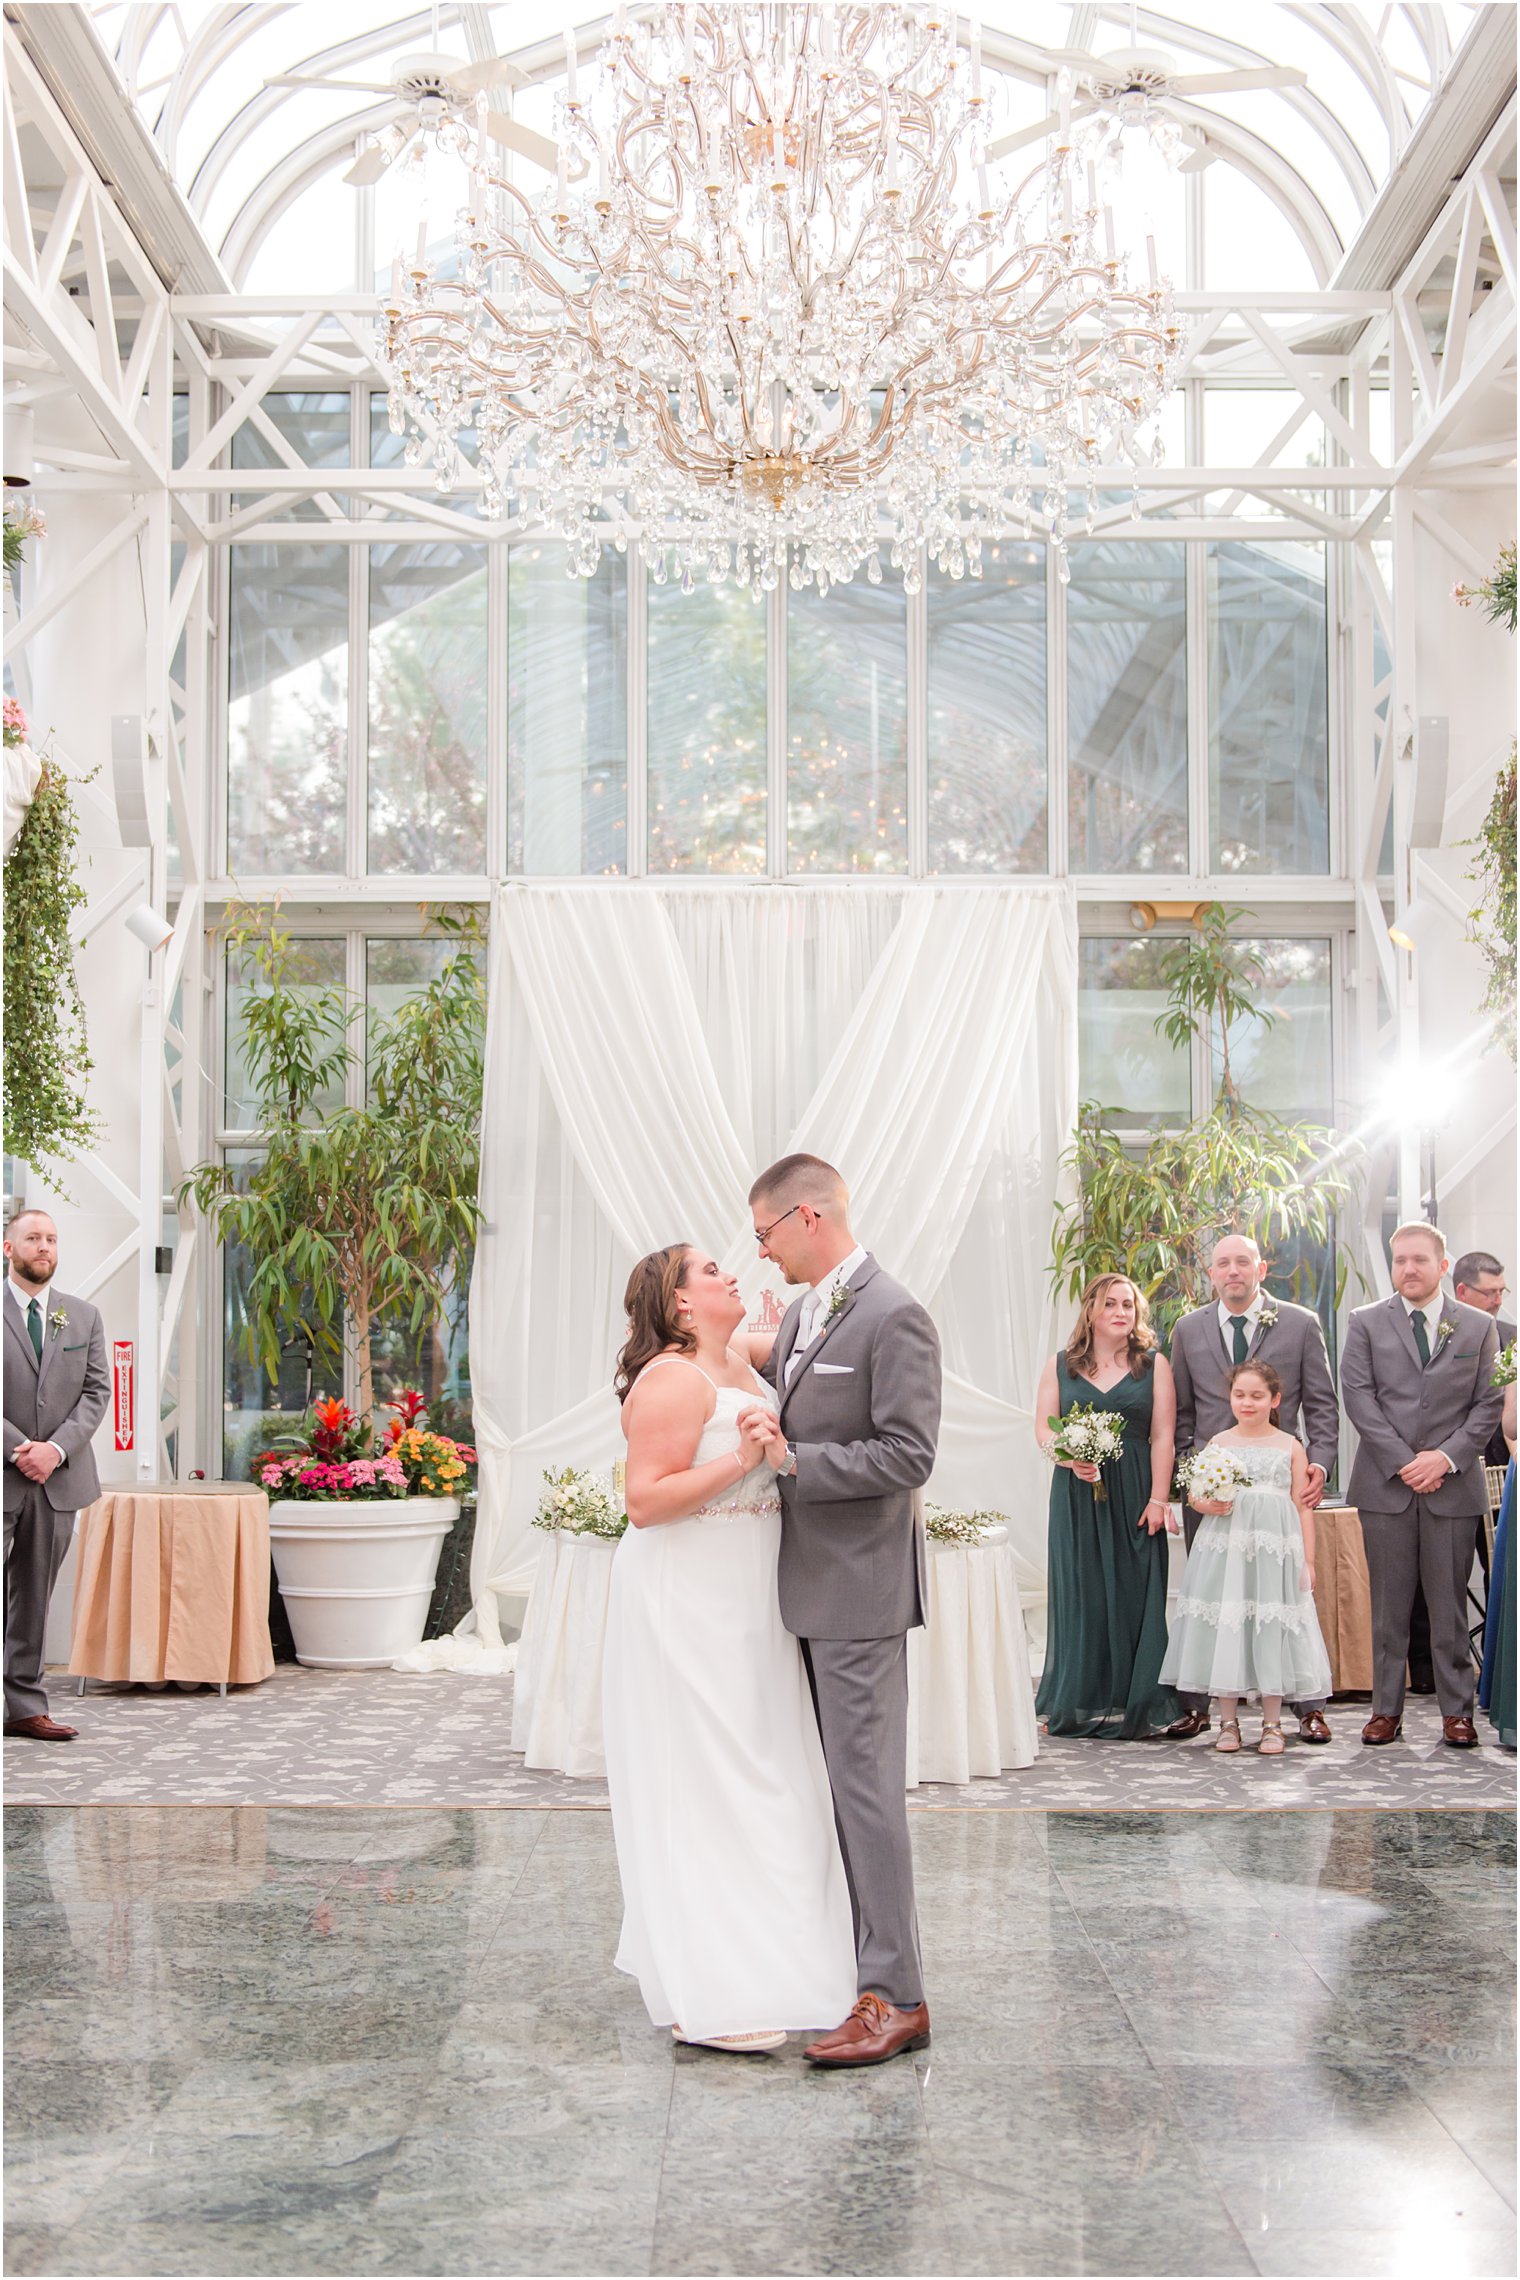 newlyweds dance together in atrium at The Madison Hotel wedding reception